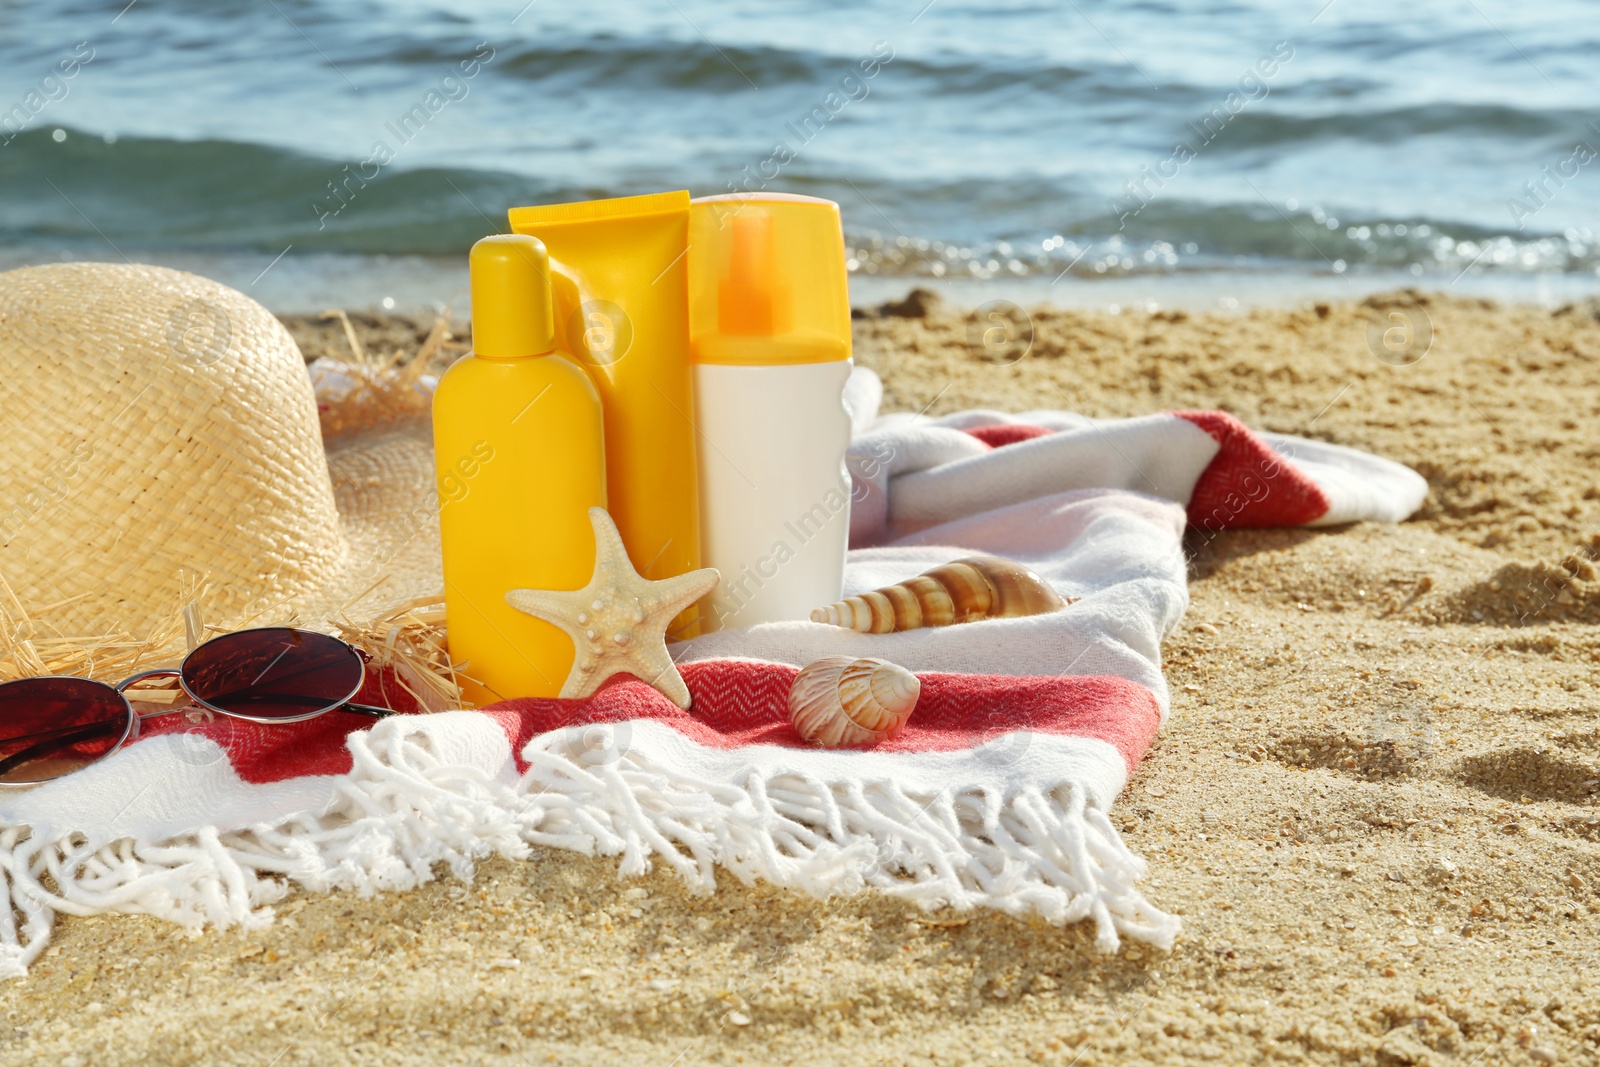 Photo of Sun protection products and beach accessories on blanket near sea, space for text